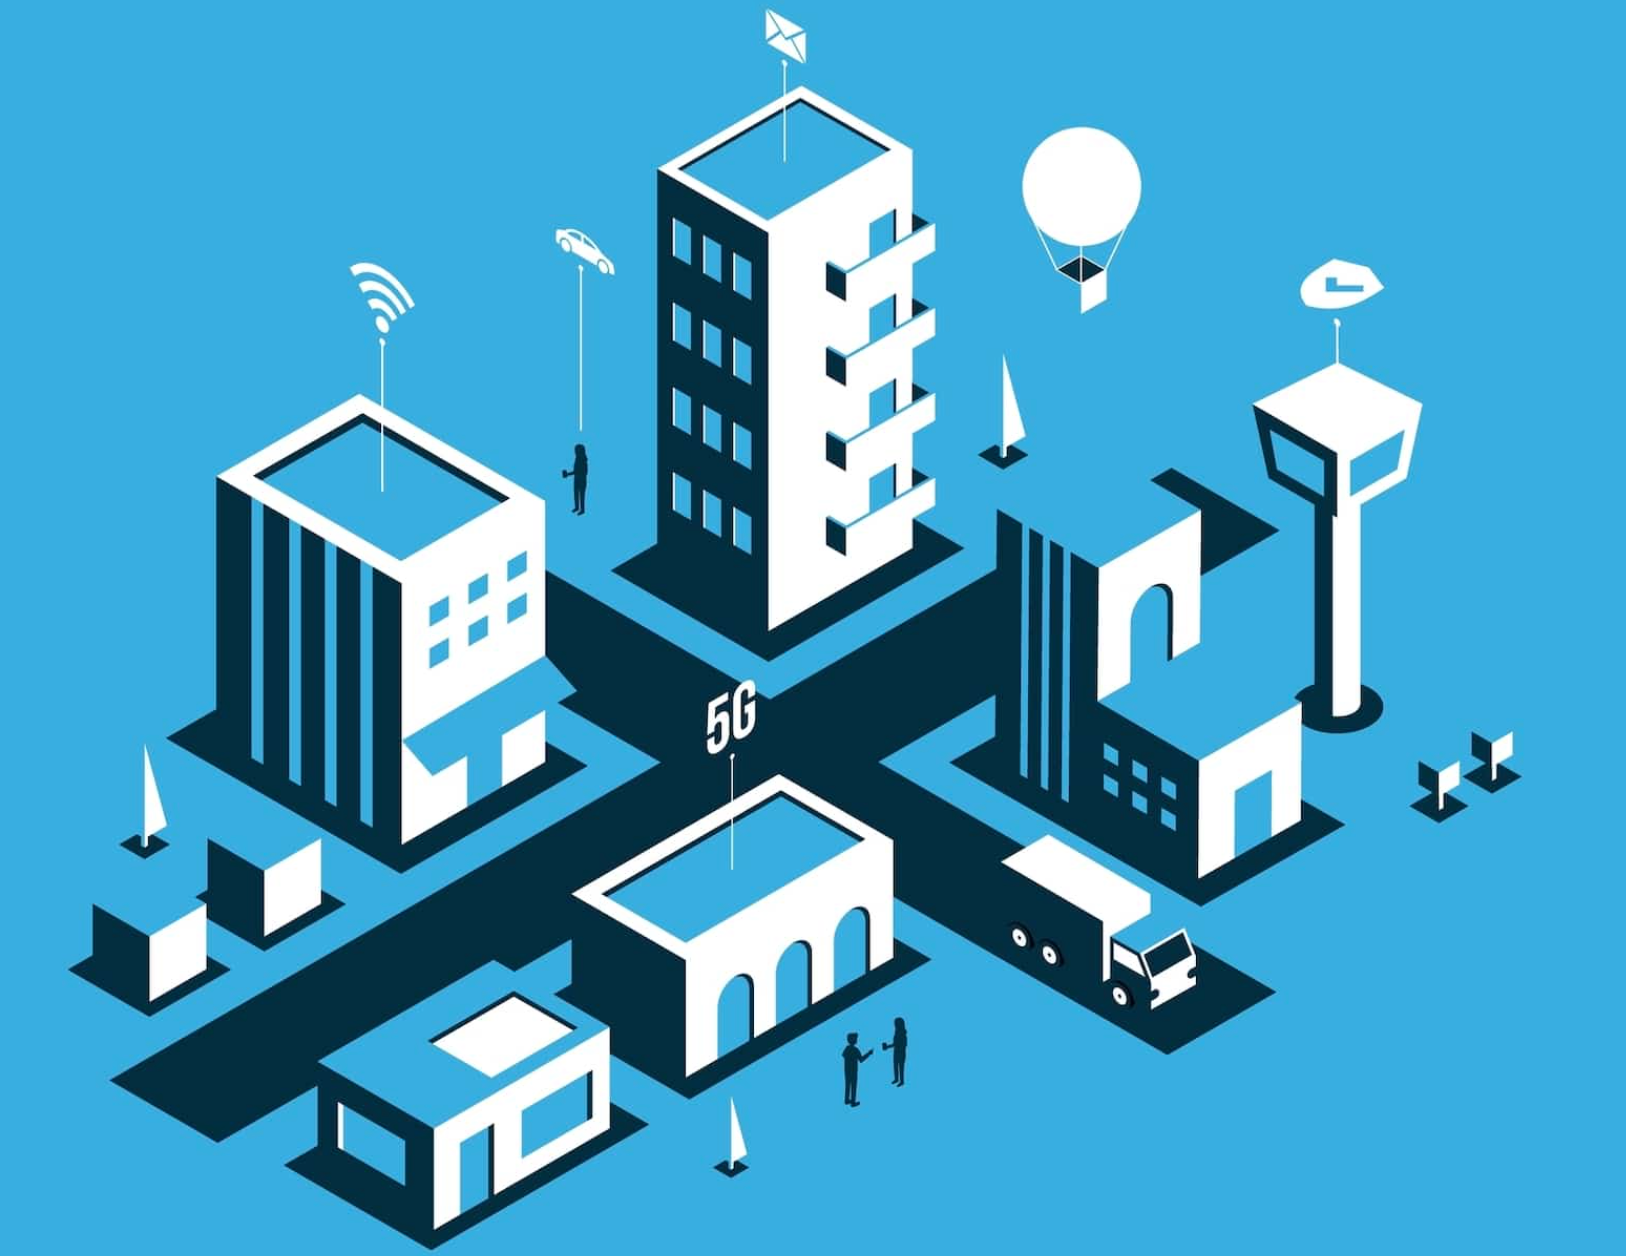 Smart building and IoT graphic